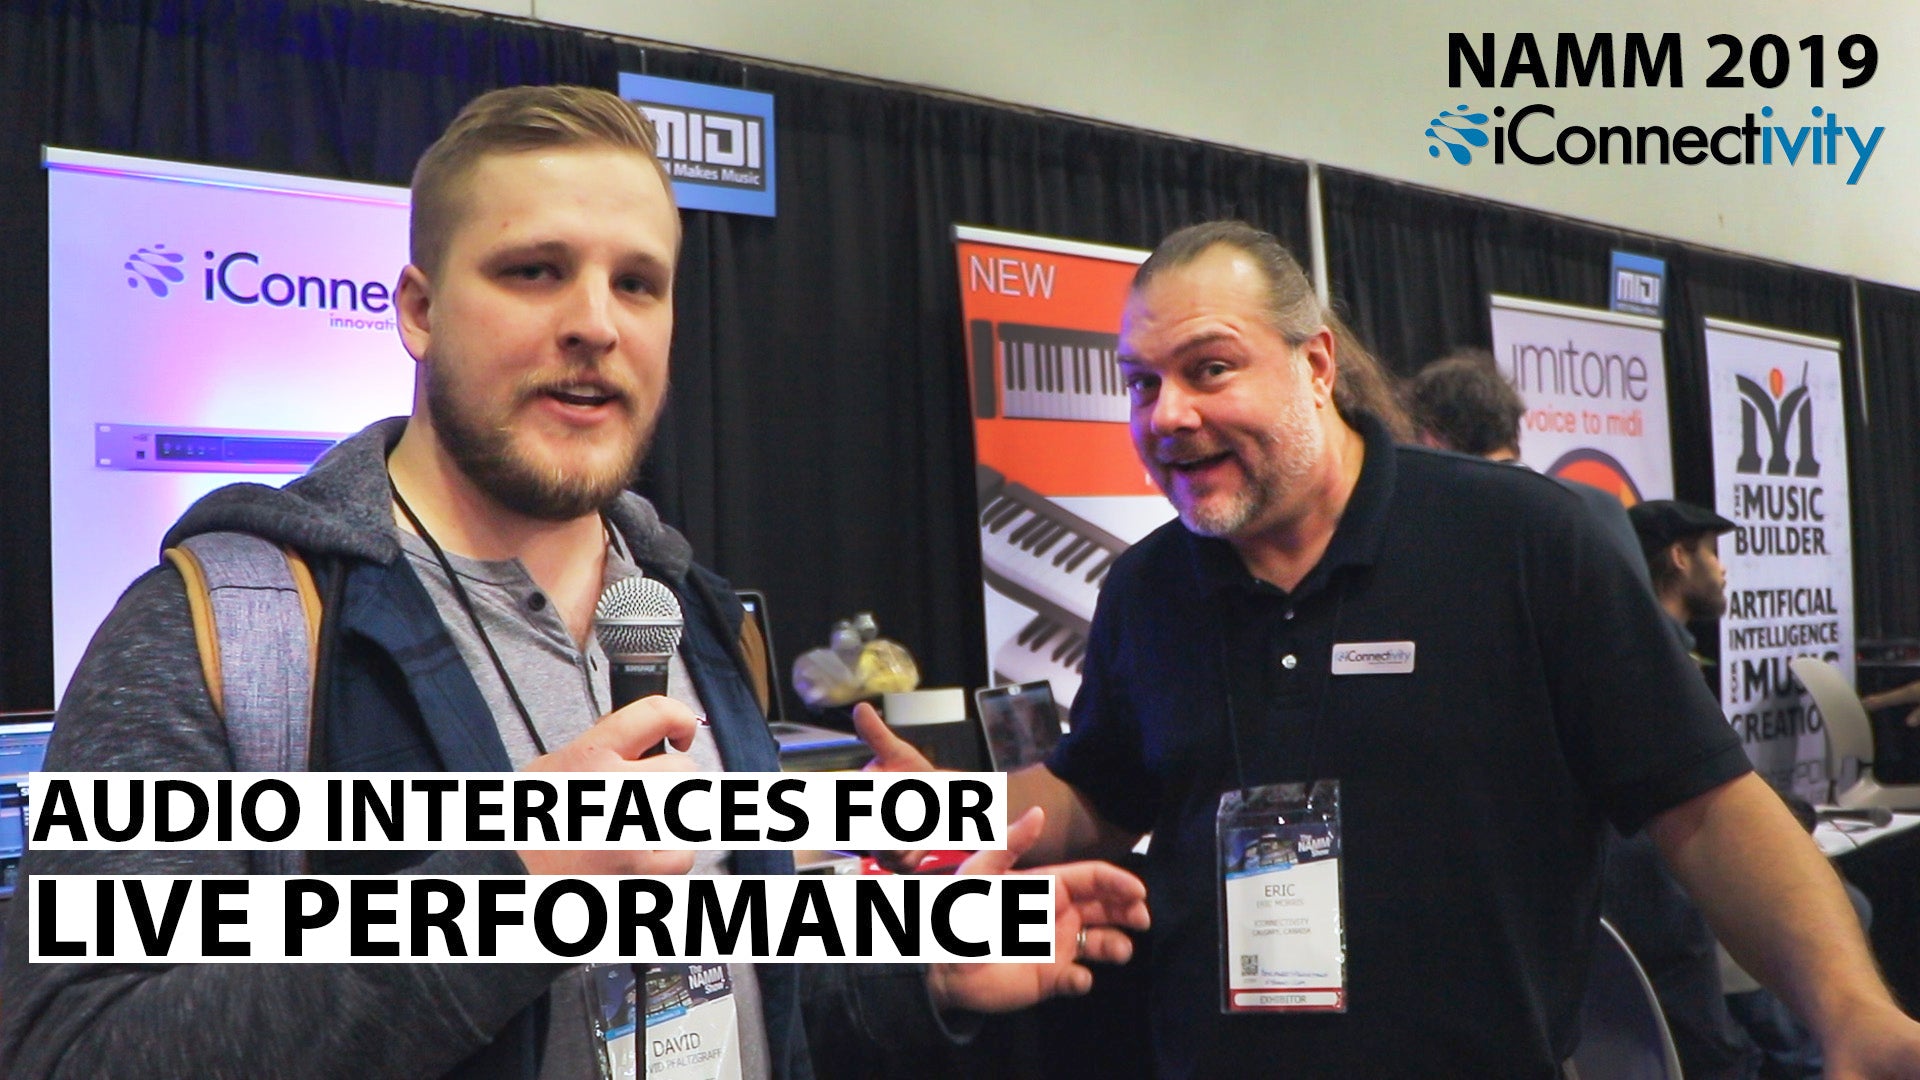 Audio Interfaces for Live Performance - NAMM 2019 MIDI Booth